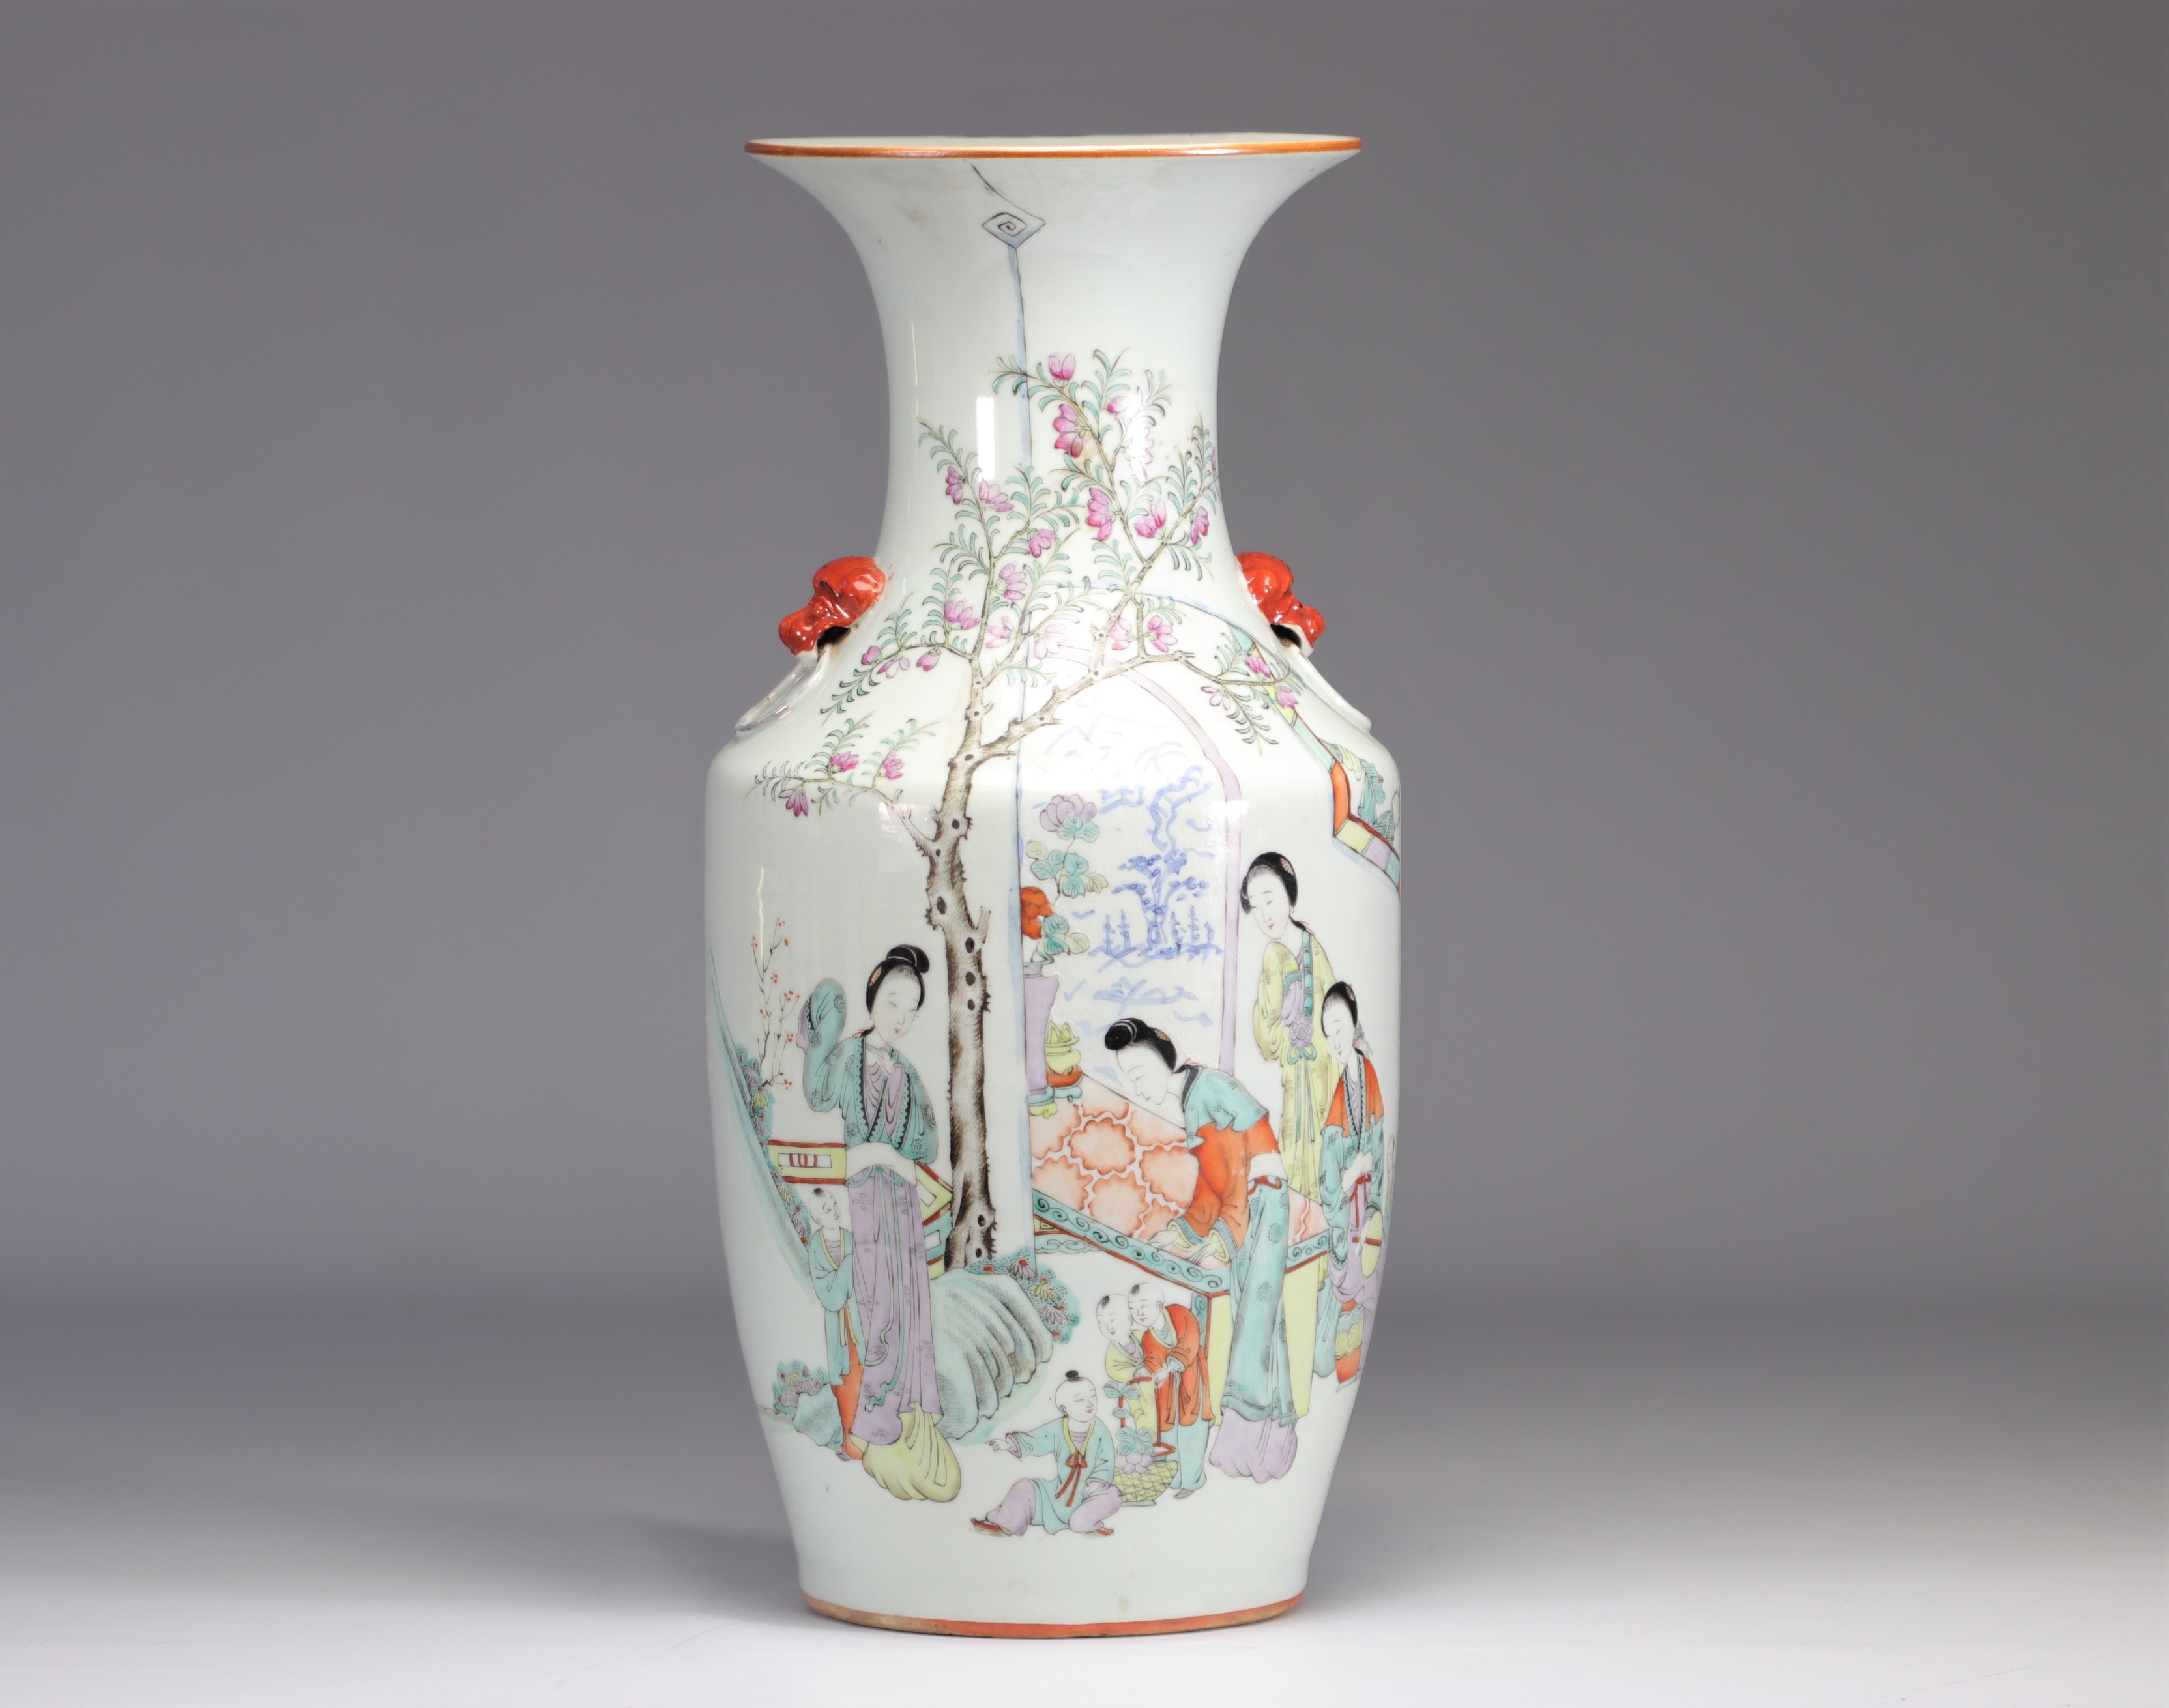 Famille rose porcelain vase decorated with figures